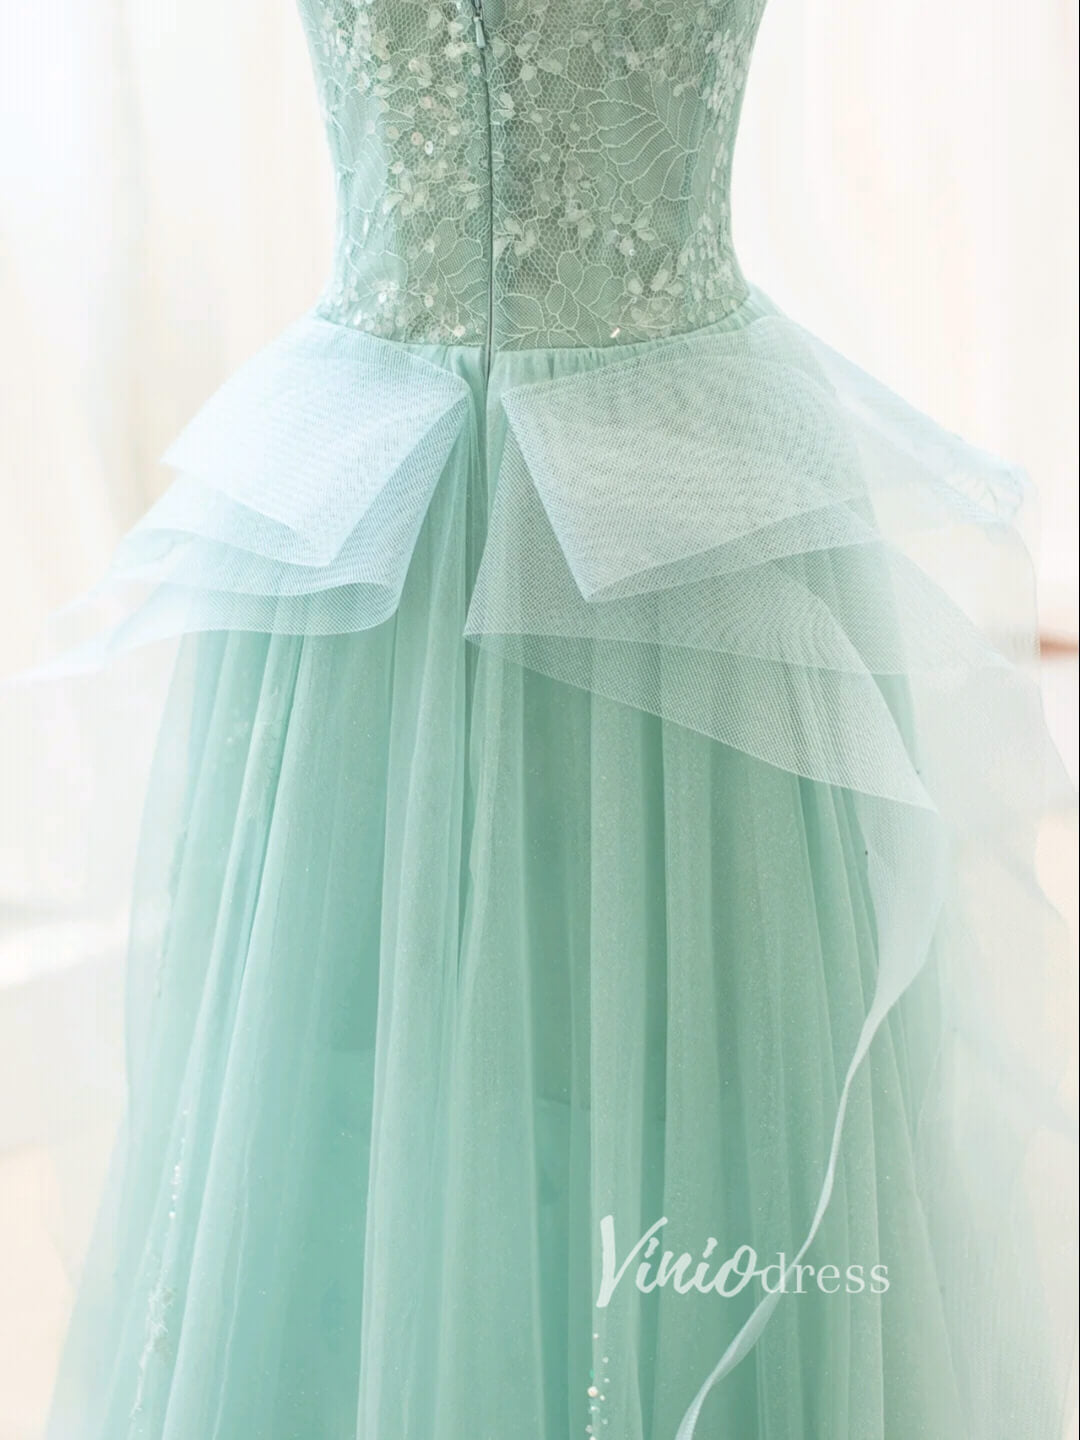 Green Tulle Prom Dresses Strapless Lace Applique Formal Dress FD3427-prom dresses-Viniodress-Viniodress